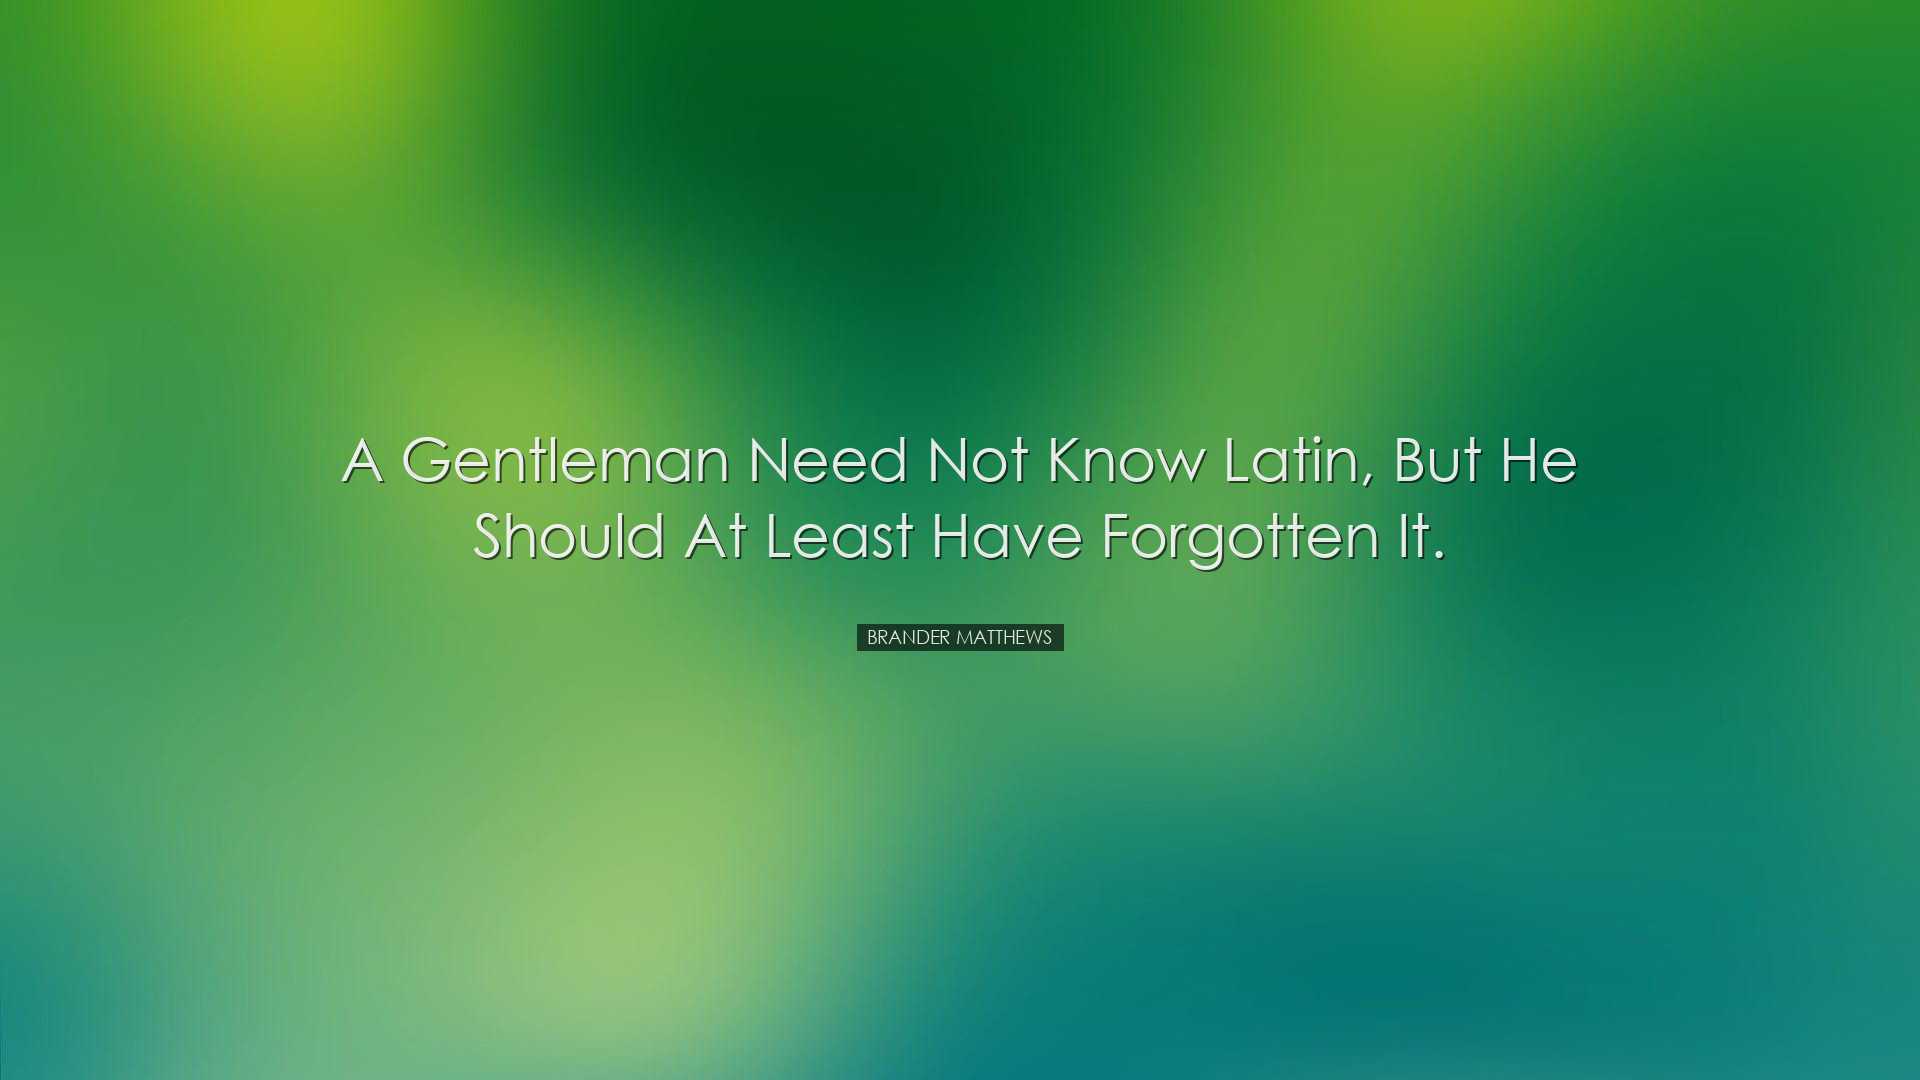 A gentleman need not know Latin, but he should at least have forgo